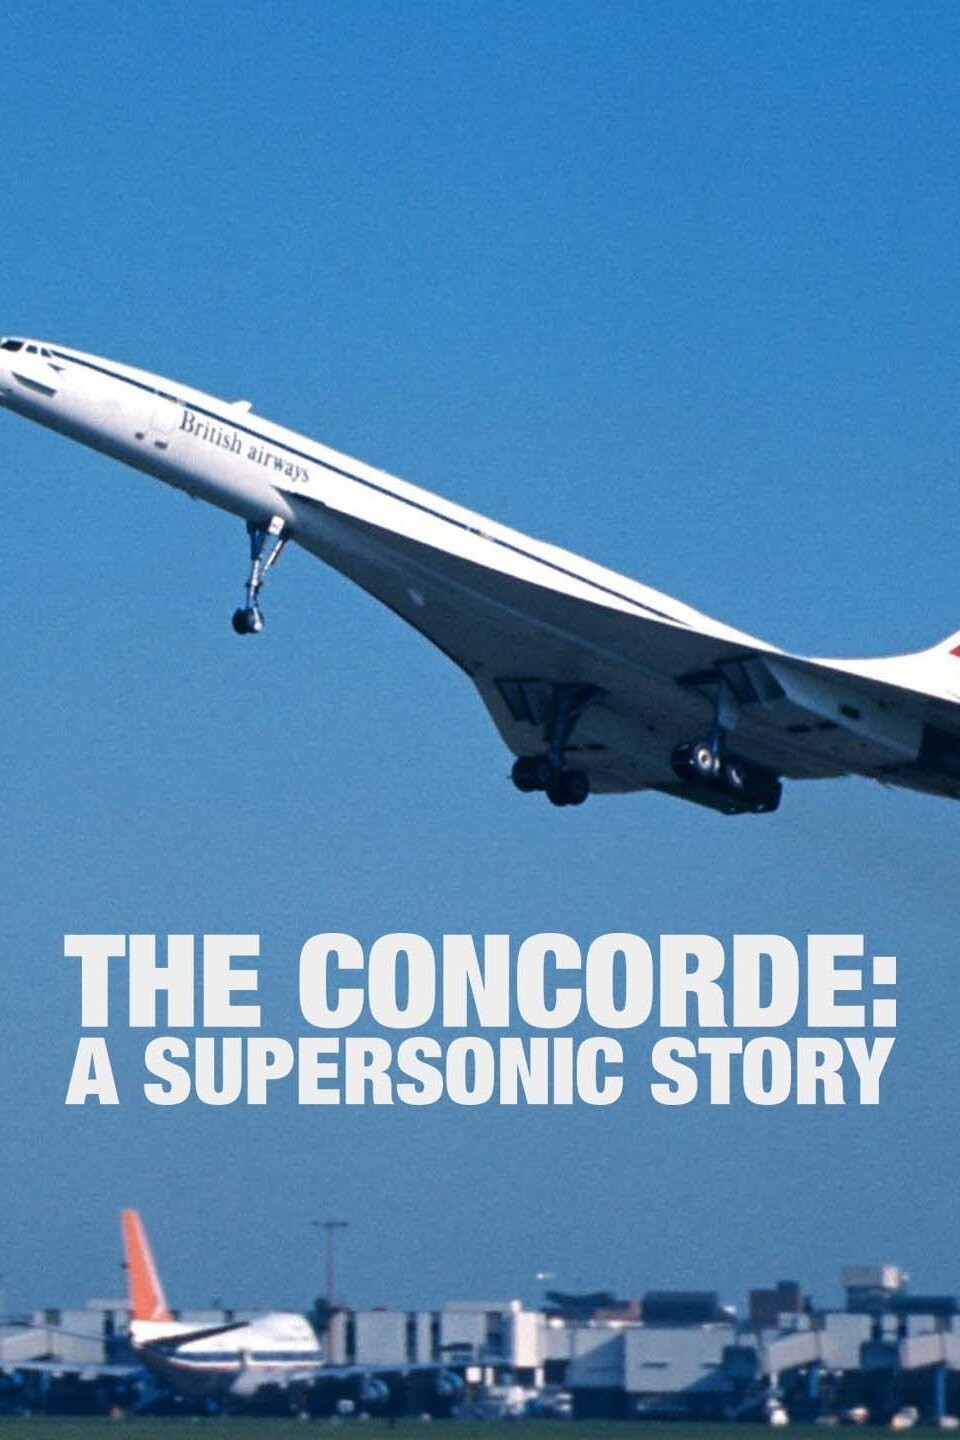 The Concorde: A Supersonic Story Season 1 | Rotten Tomatoes